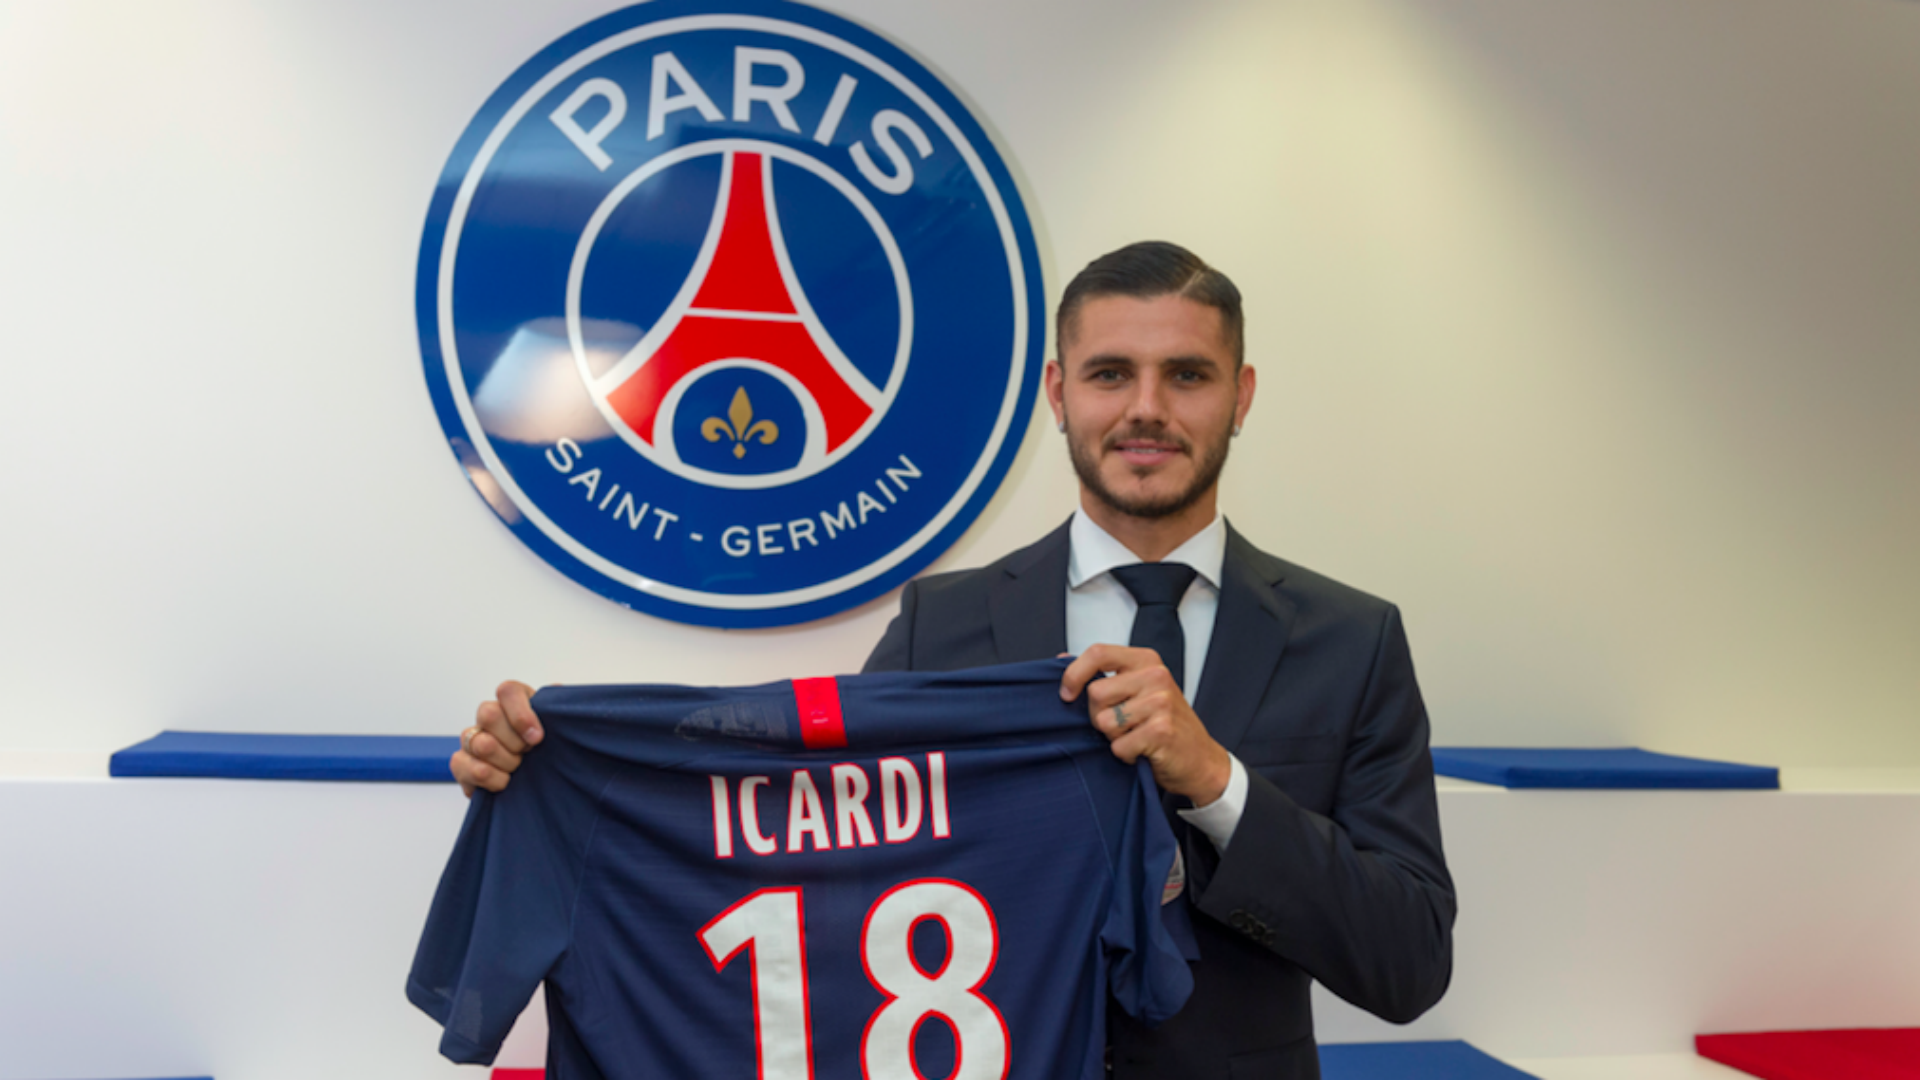 Undisciplined Mauro Icardi Will Fit Right In With Psg Says Paolo